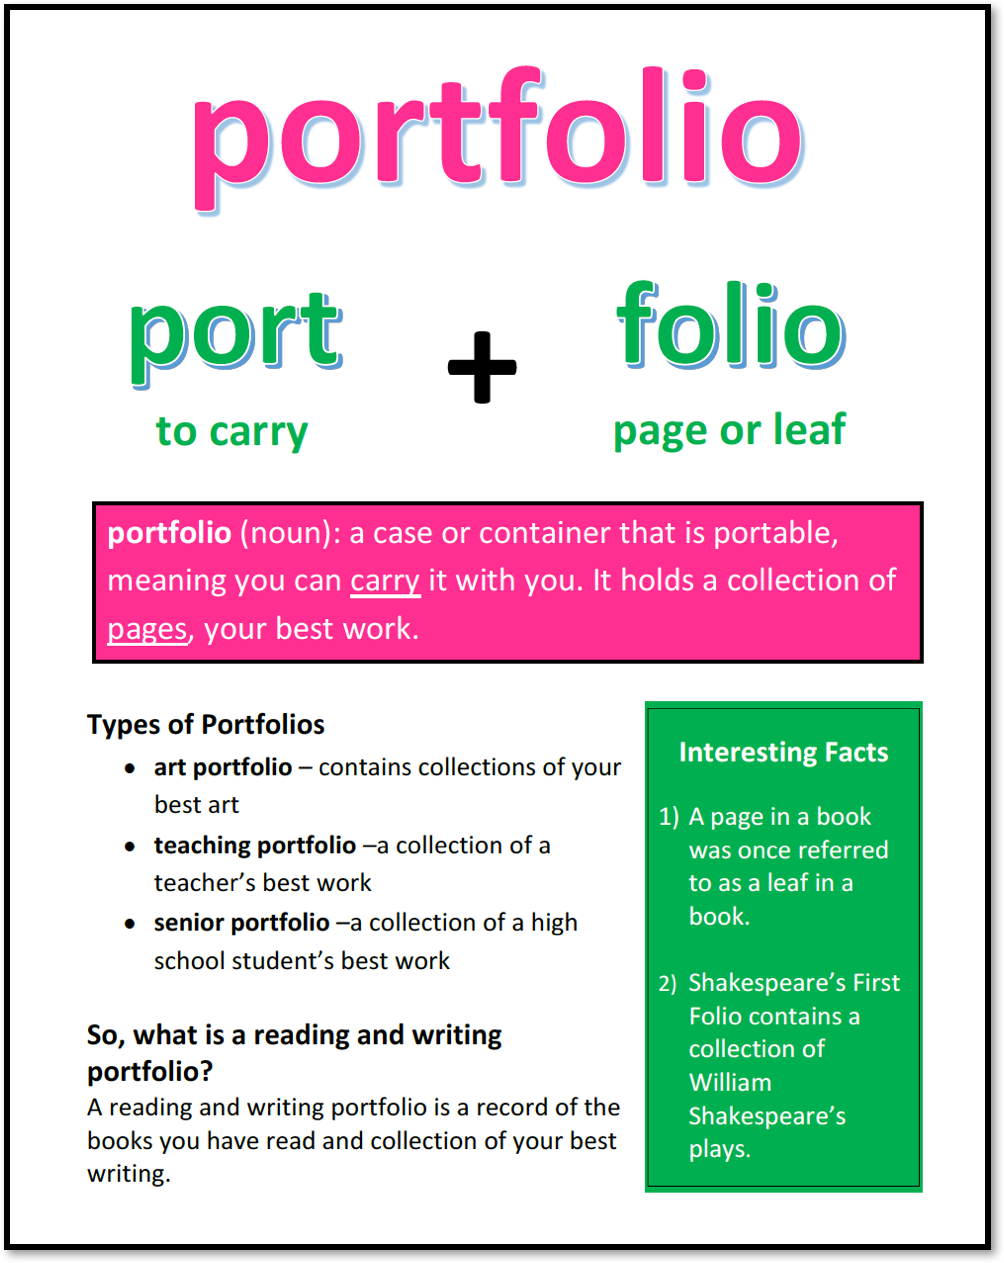 Easy Steps to Take Your Reading and Writing Porfolios Digital | Scholastic